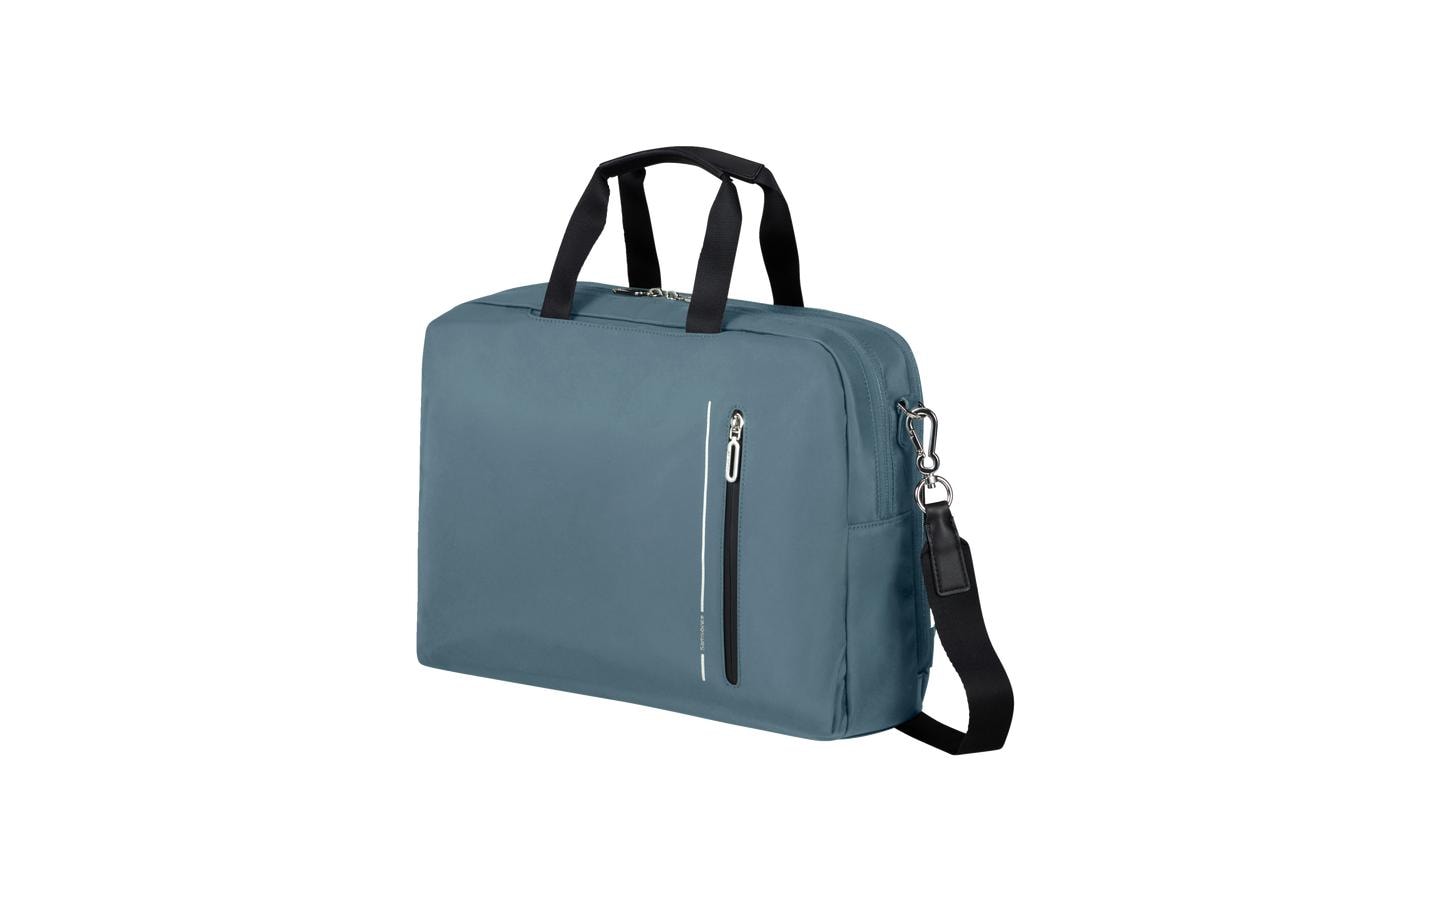 Samsonite Notebooktasche Ongoing 2 compartments 15.6 Petrol Grey